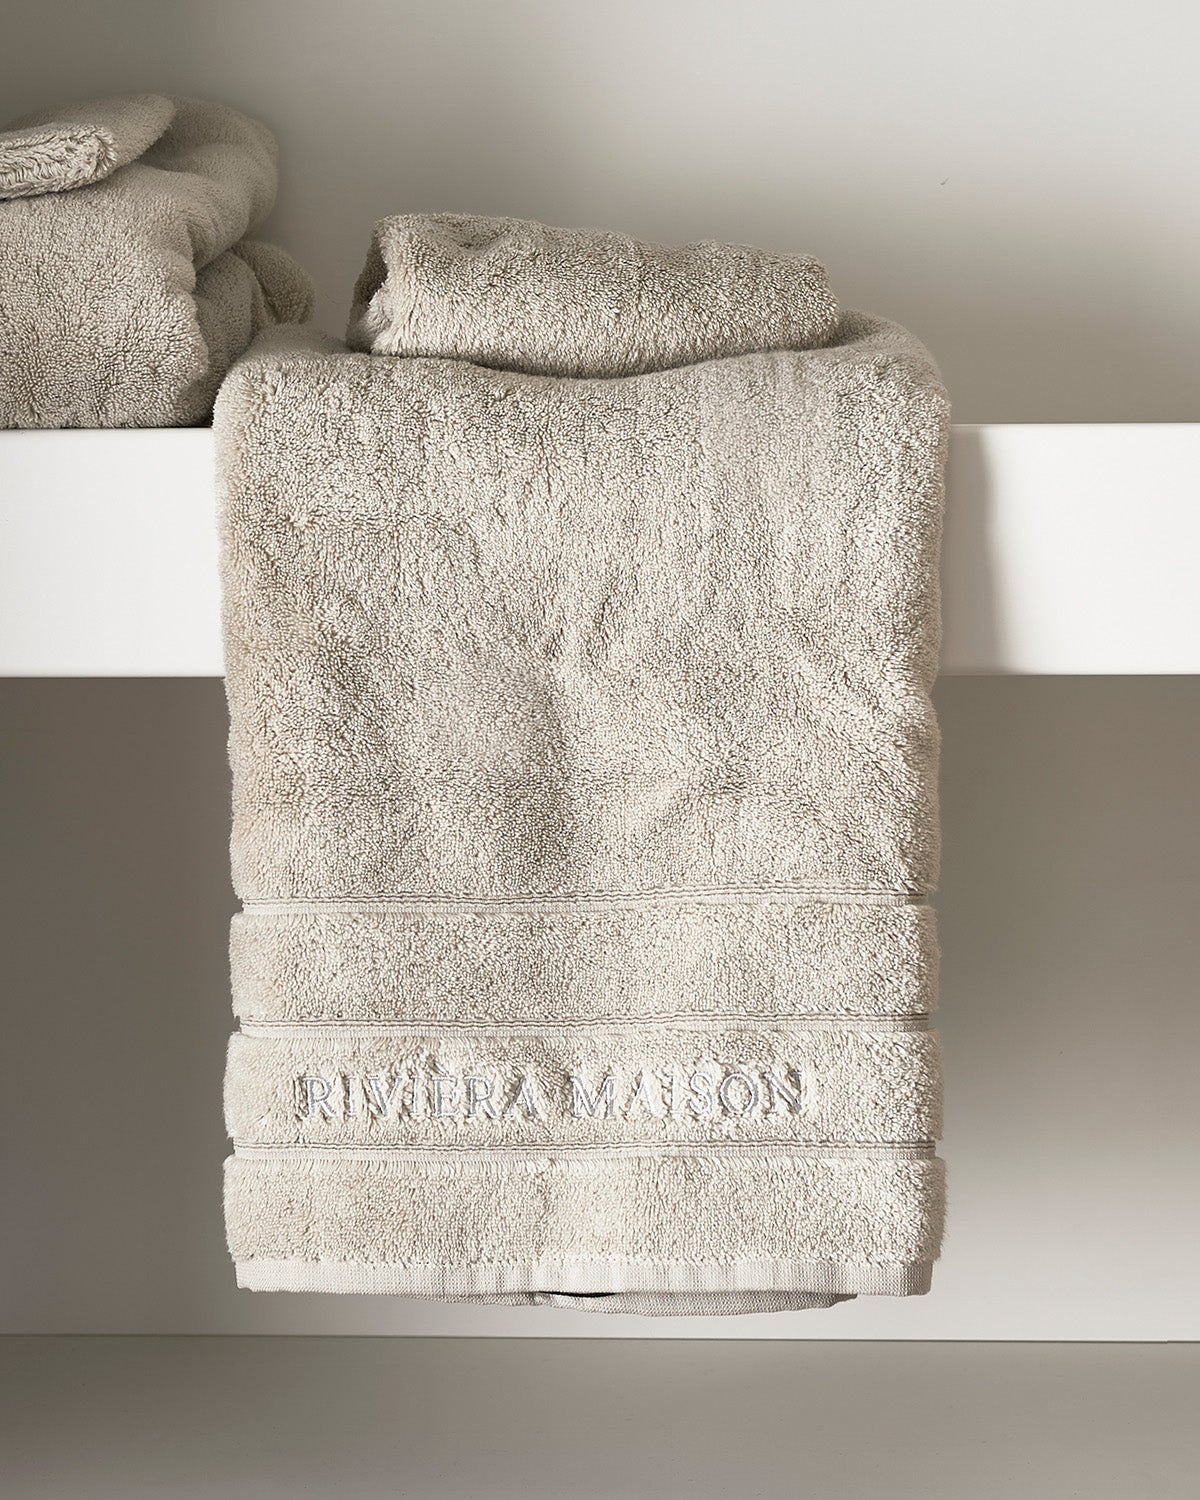 TOWELS  soft, thick, stone-colored  on a chair by Riviera Maison